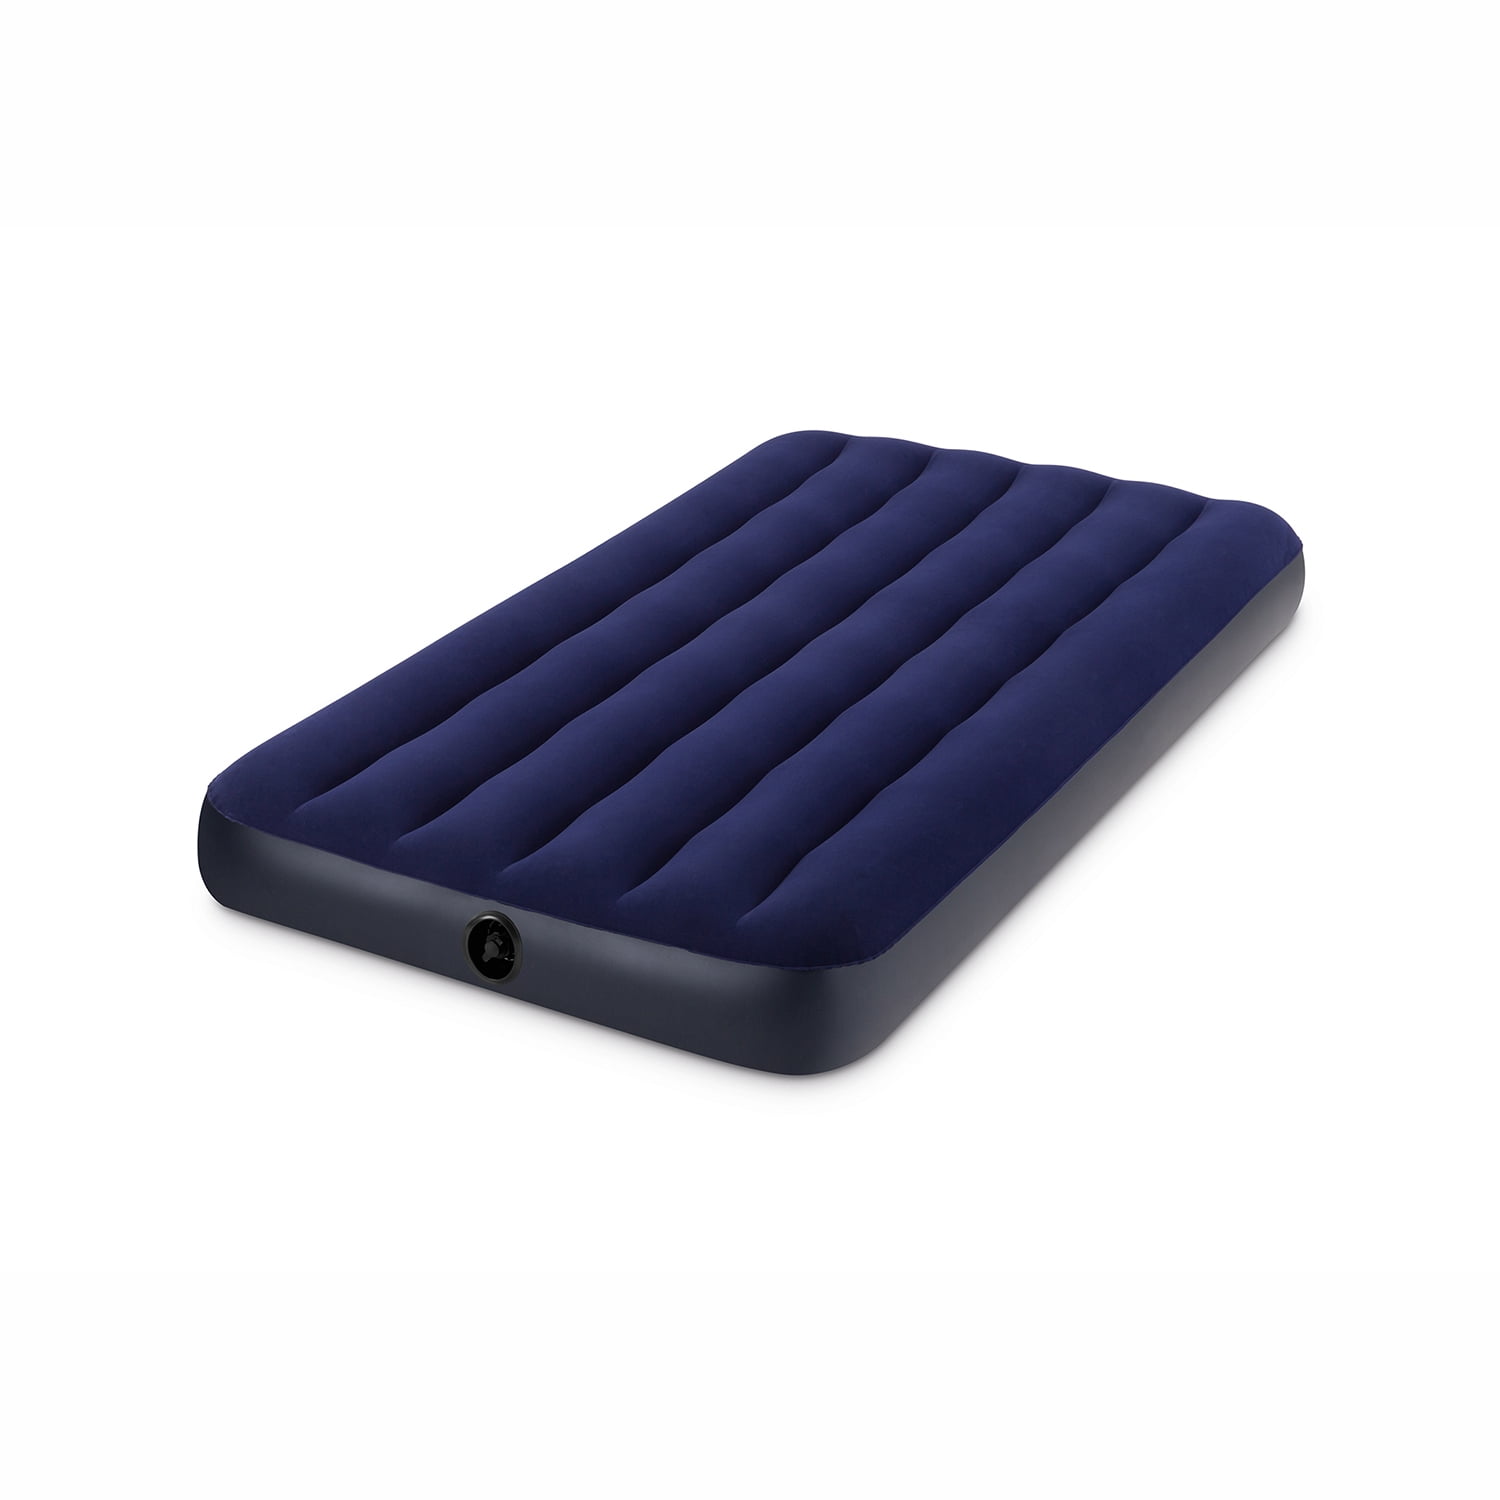 Camping Air Mattress Twin Size Sleeping Inflatable Airbed Intex Quickbed Sleep 